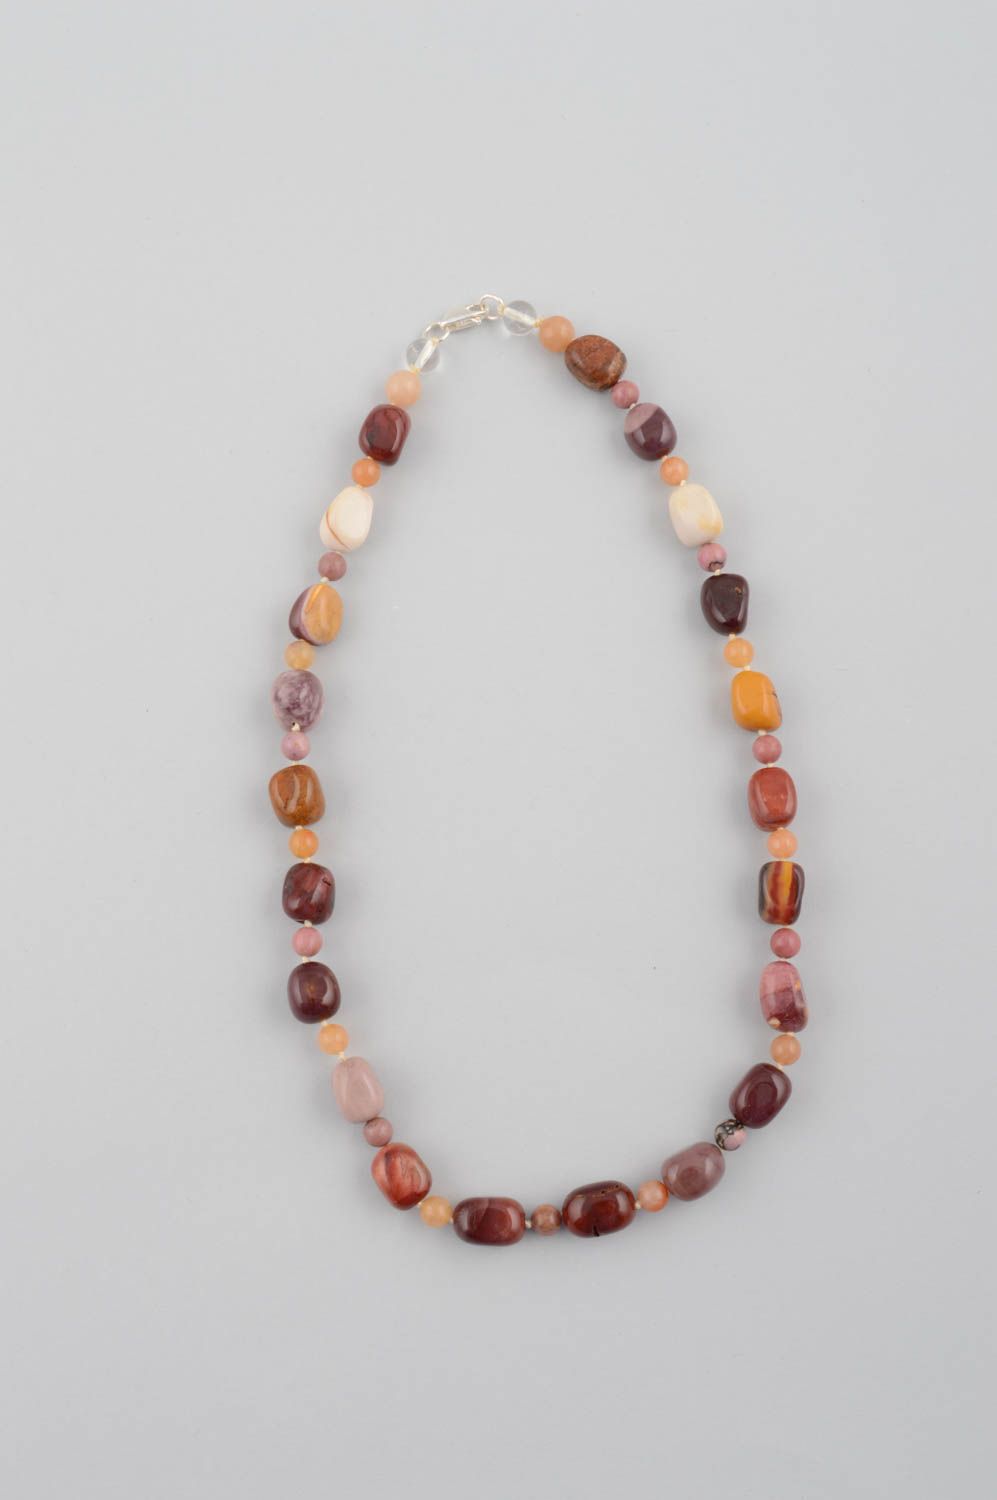 Handmade beads long beads with natural stones design jewelry women necklace  photo 2